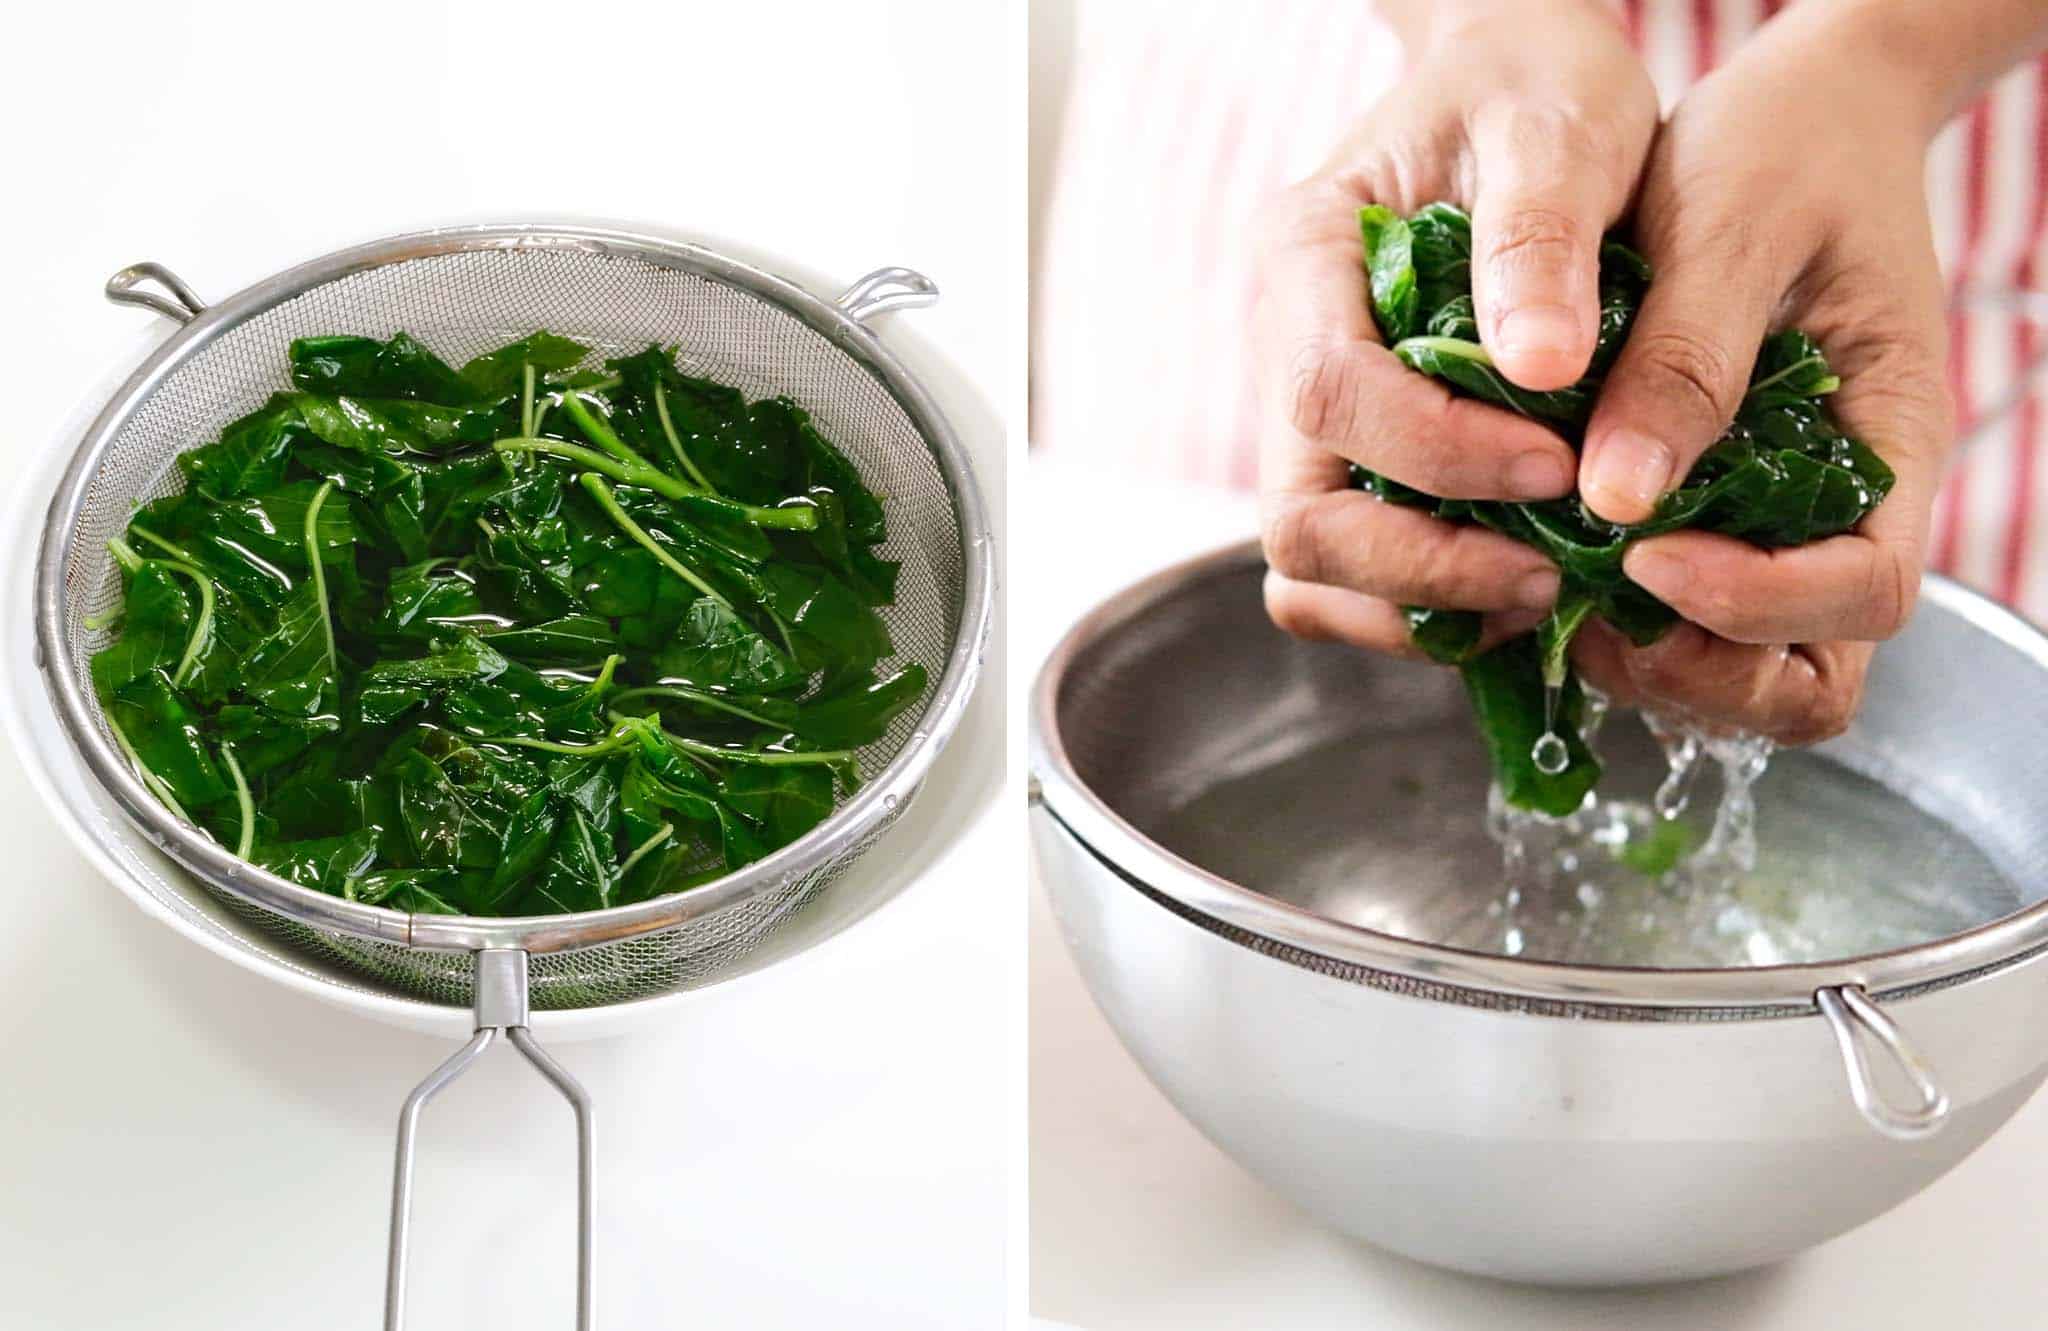 Blanch and squeeze the spinach to dry.